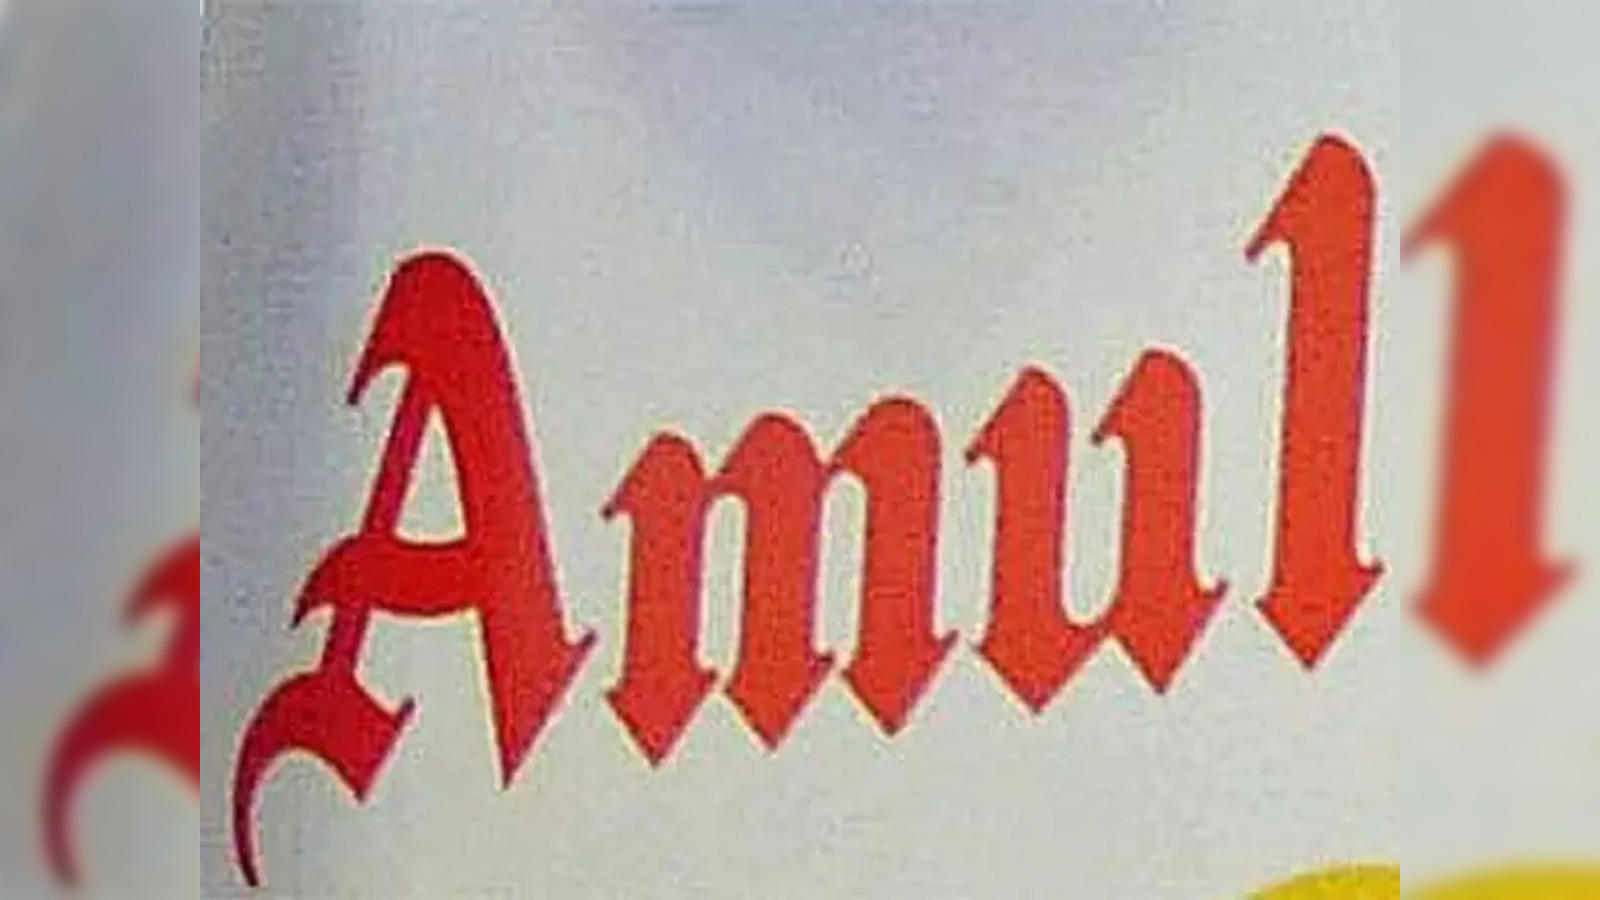 Amul Girl – Marketing icon-turned-social media darling who has an opinion  on everything